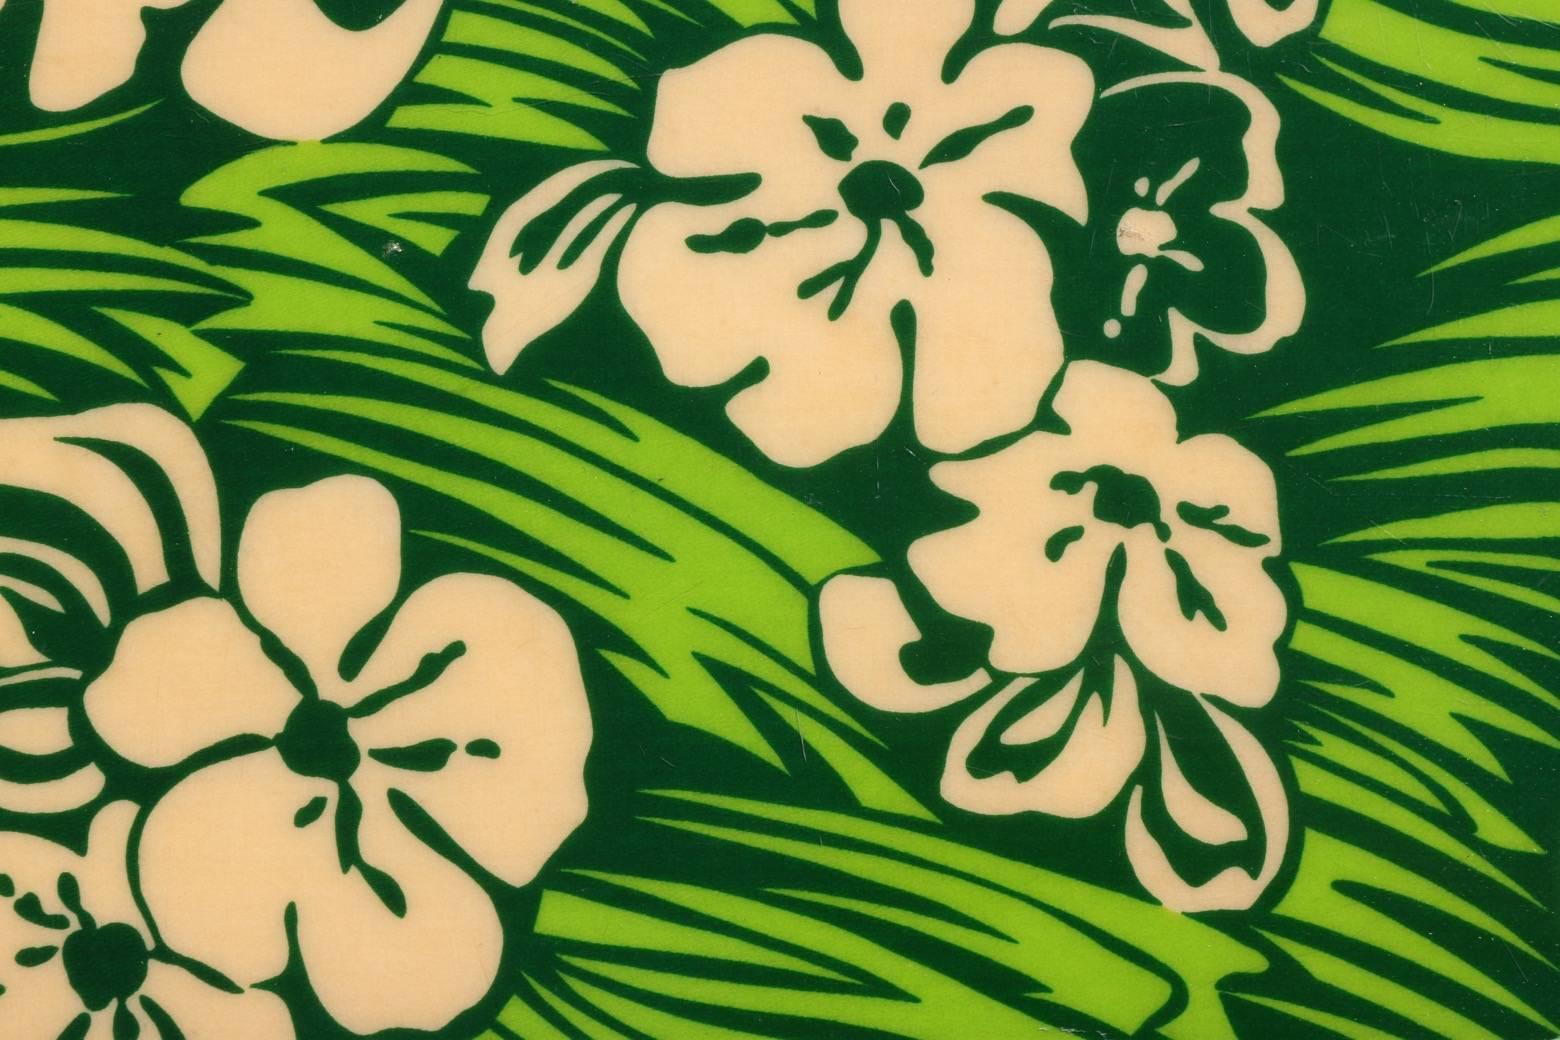 Vibrant Green Floral Dextra Bellyboard Surfboard, circa 1965 For Sale 1